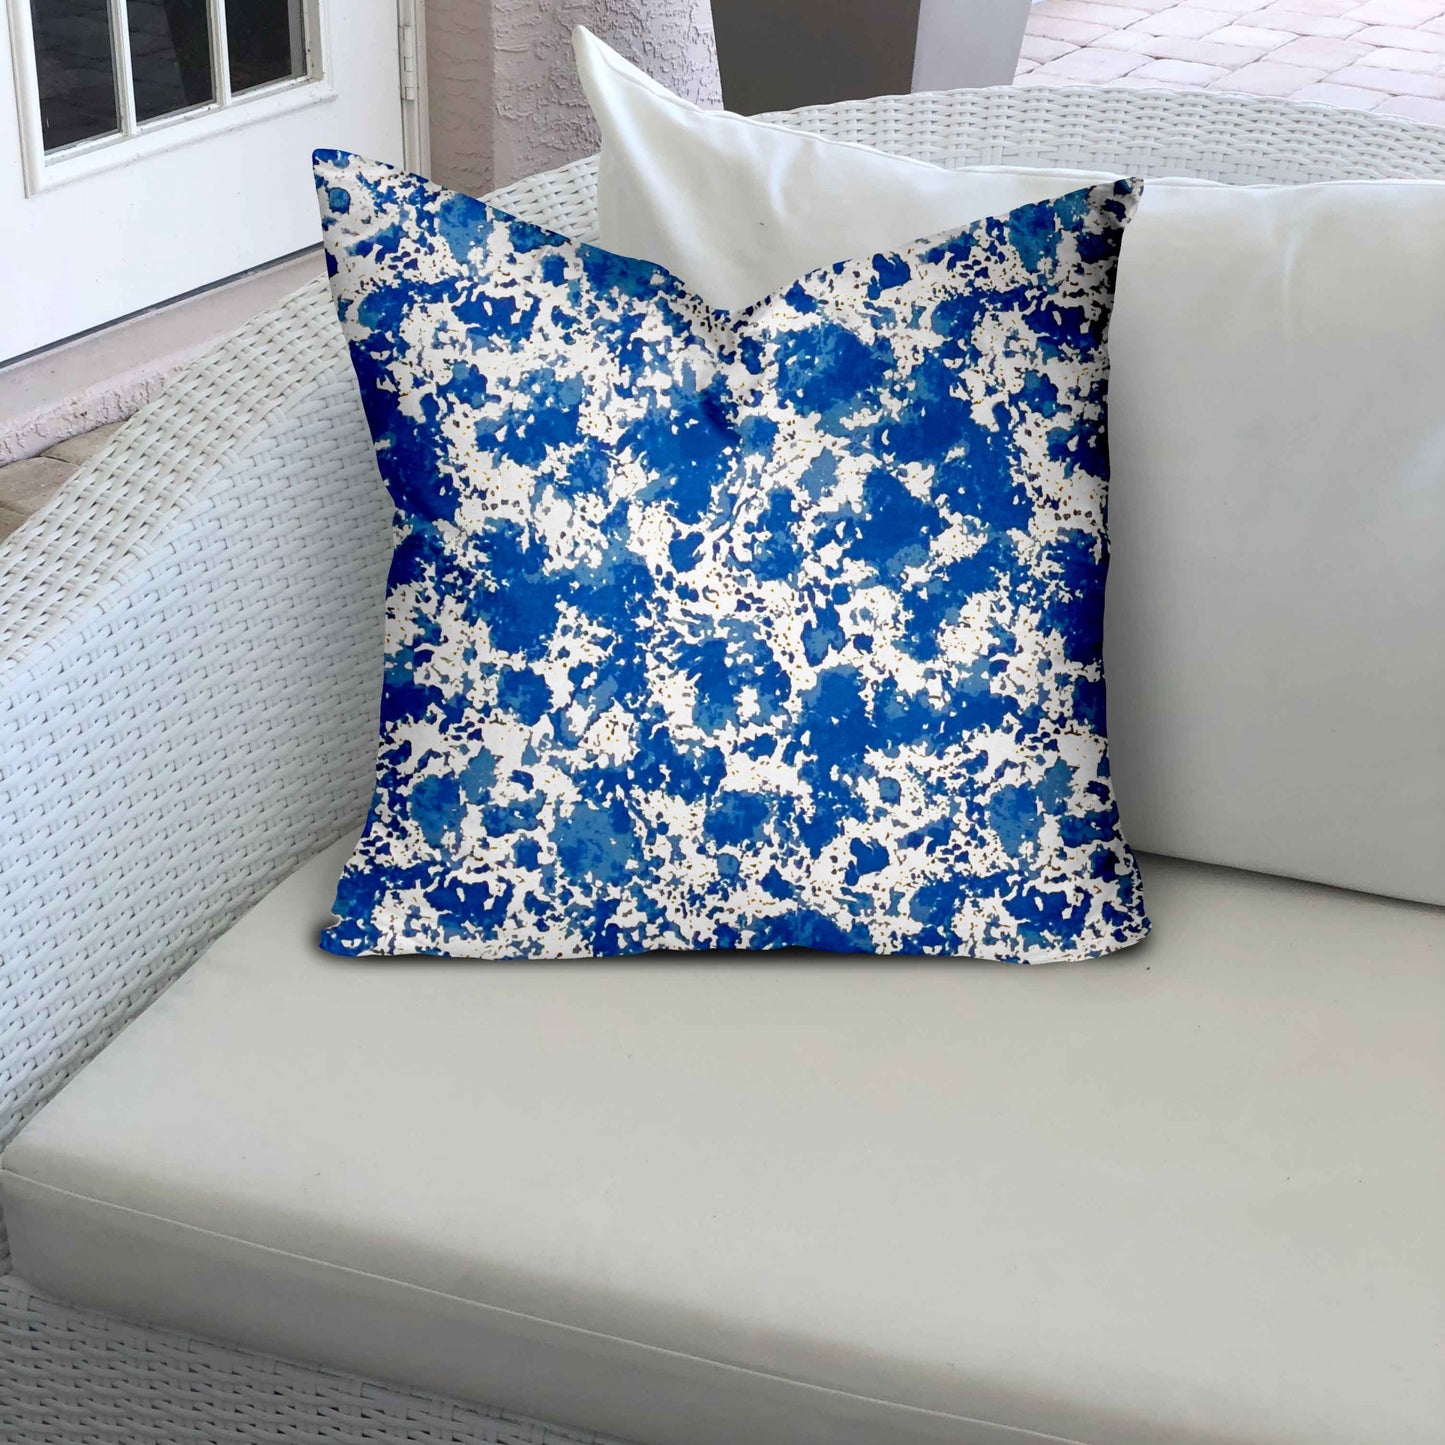 16" X 16" Blue And White Zippered Coastal Throw Indoor Outdoor Pillow Cover